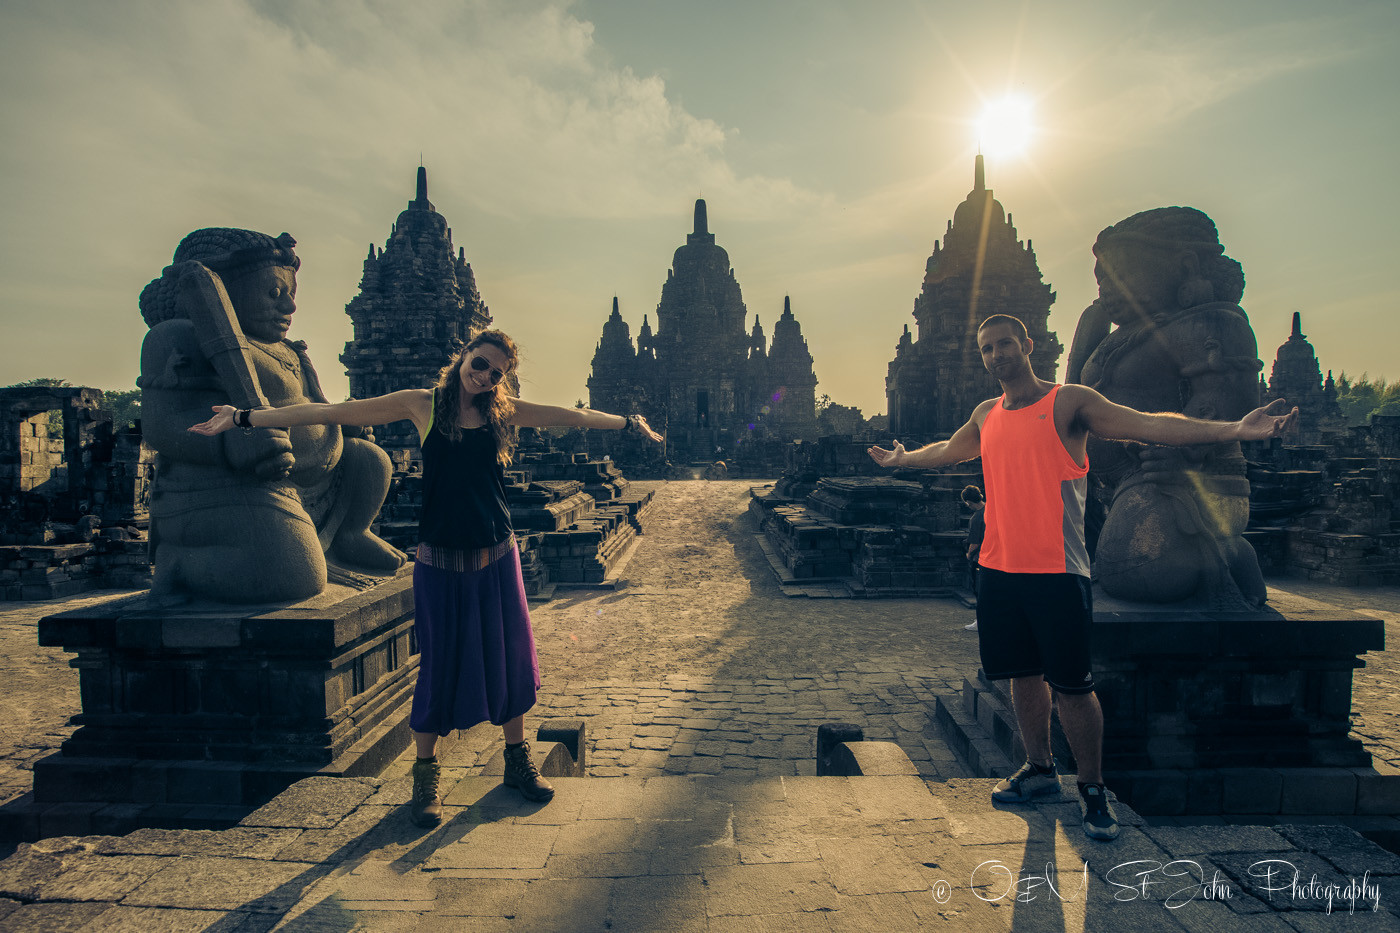 What to do in Yogyakarta: Visit Candi Sewu, the lesser known temple just a few kms away from Prambanan. Java, Indonesia